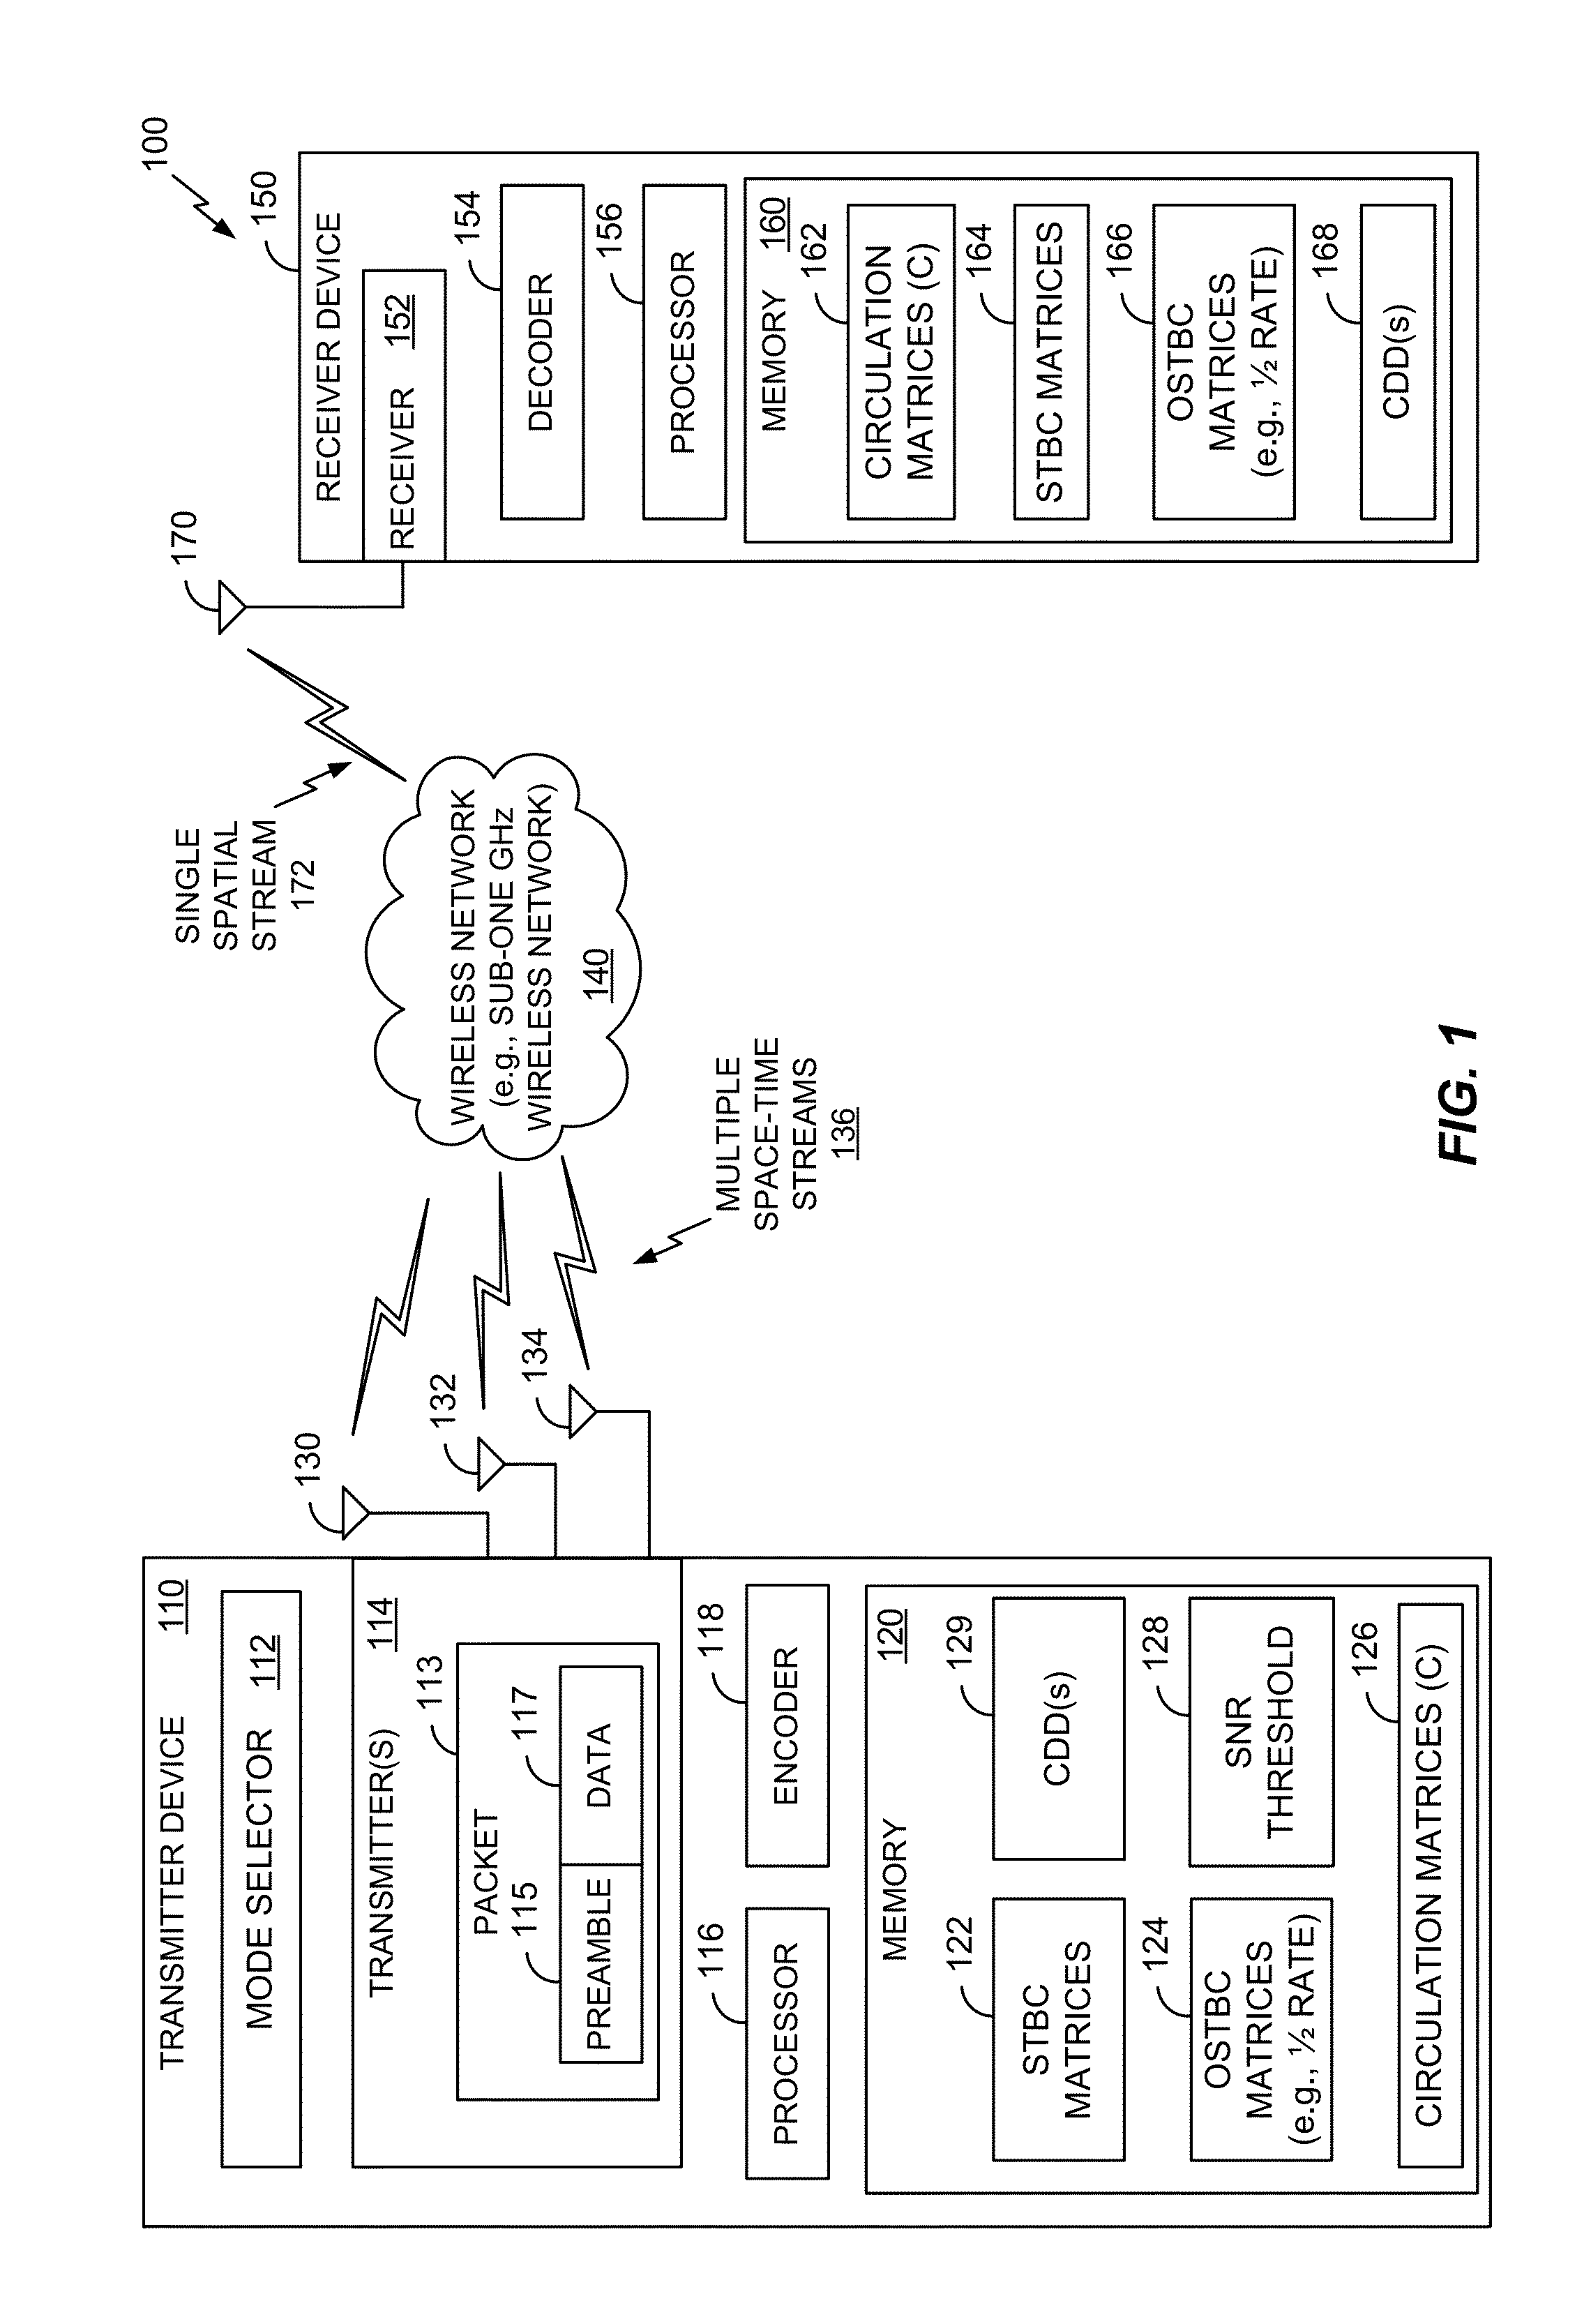 Systems and methods of using space time block codes